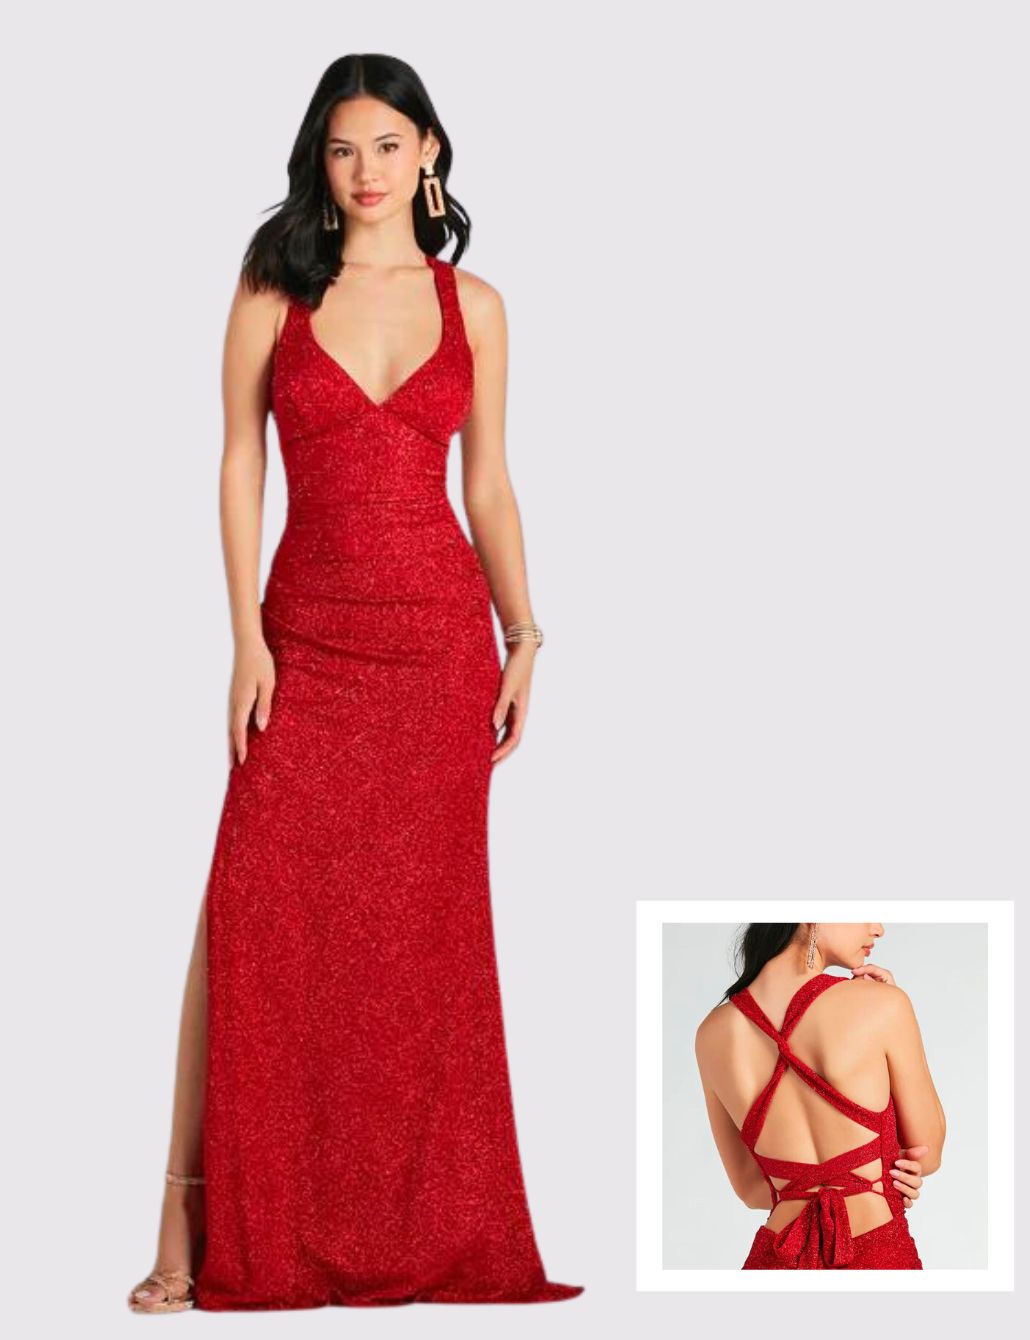 Red Sequin Dresses, Red Sparkly & Glitter Dresses